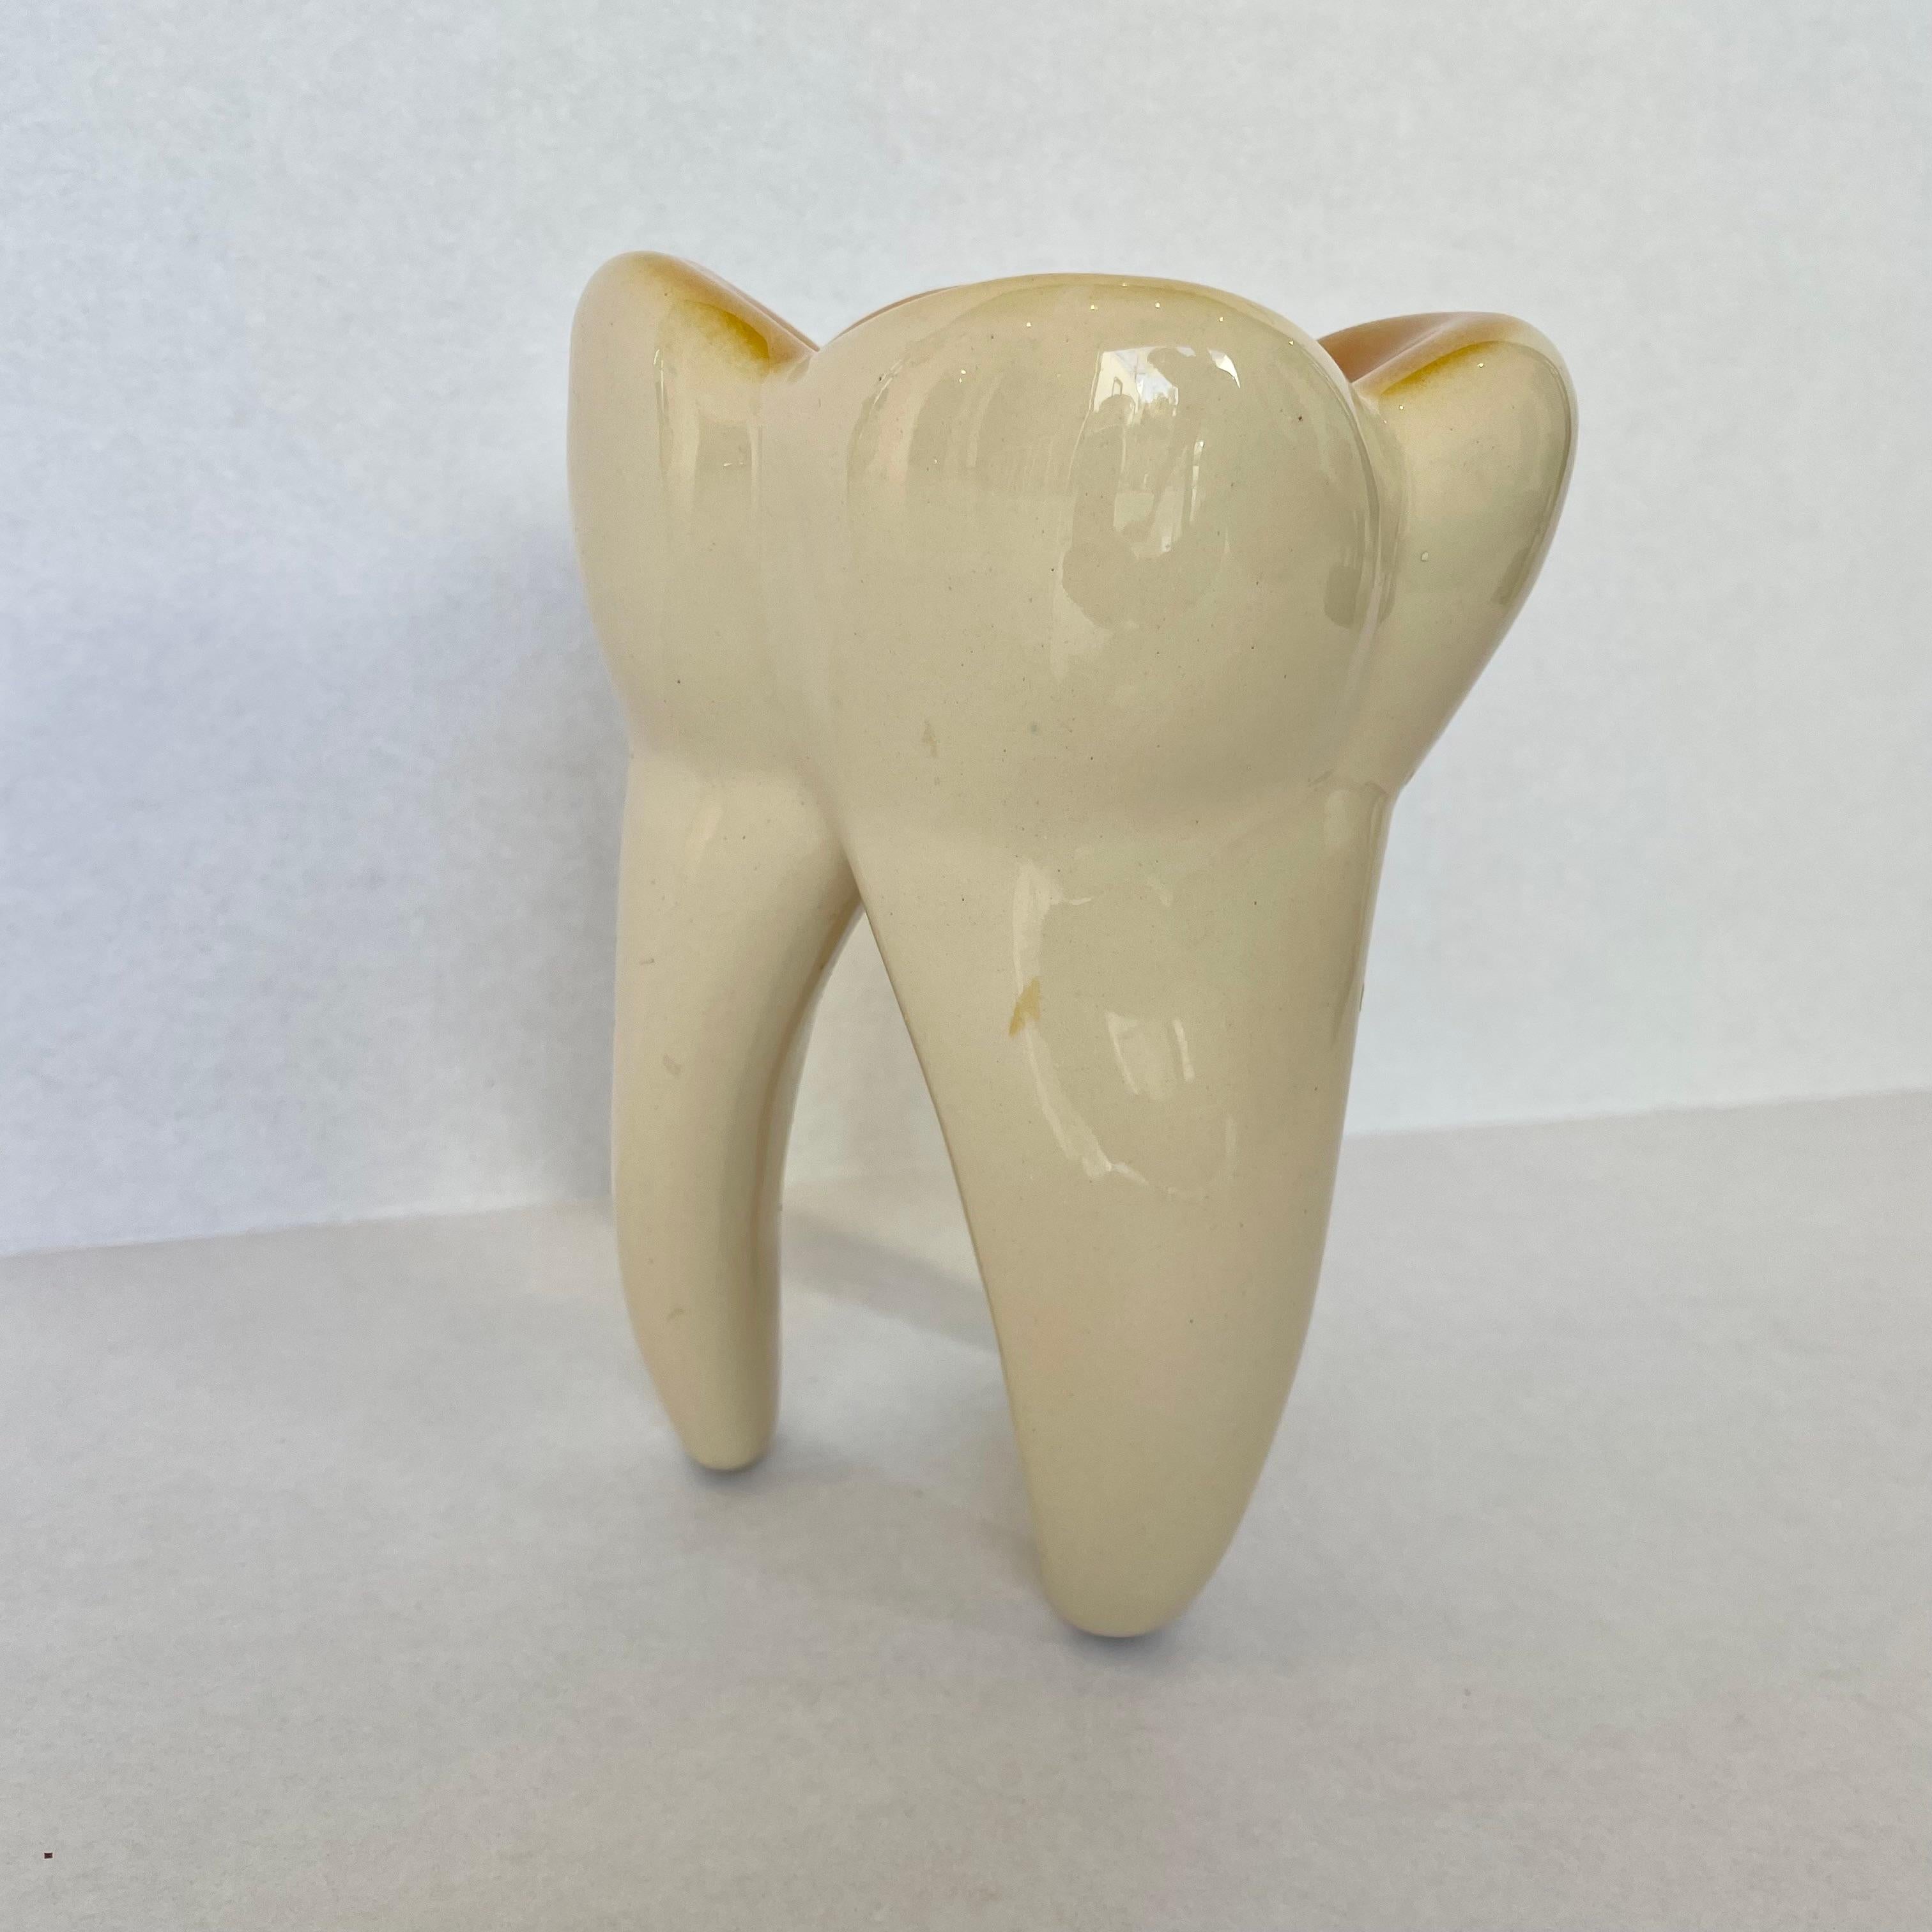 Giant Ceramic Tooth Catchall In Good Condition For Sale In Los Angeles, CA